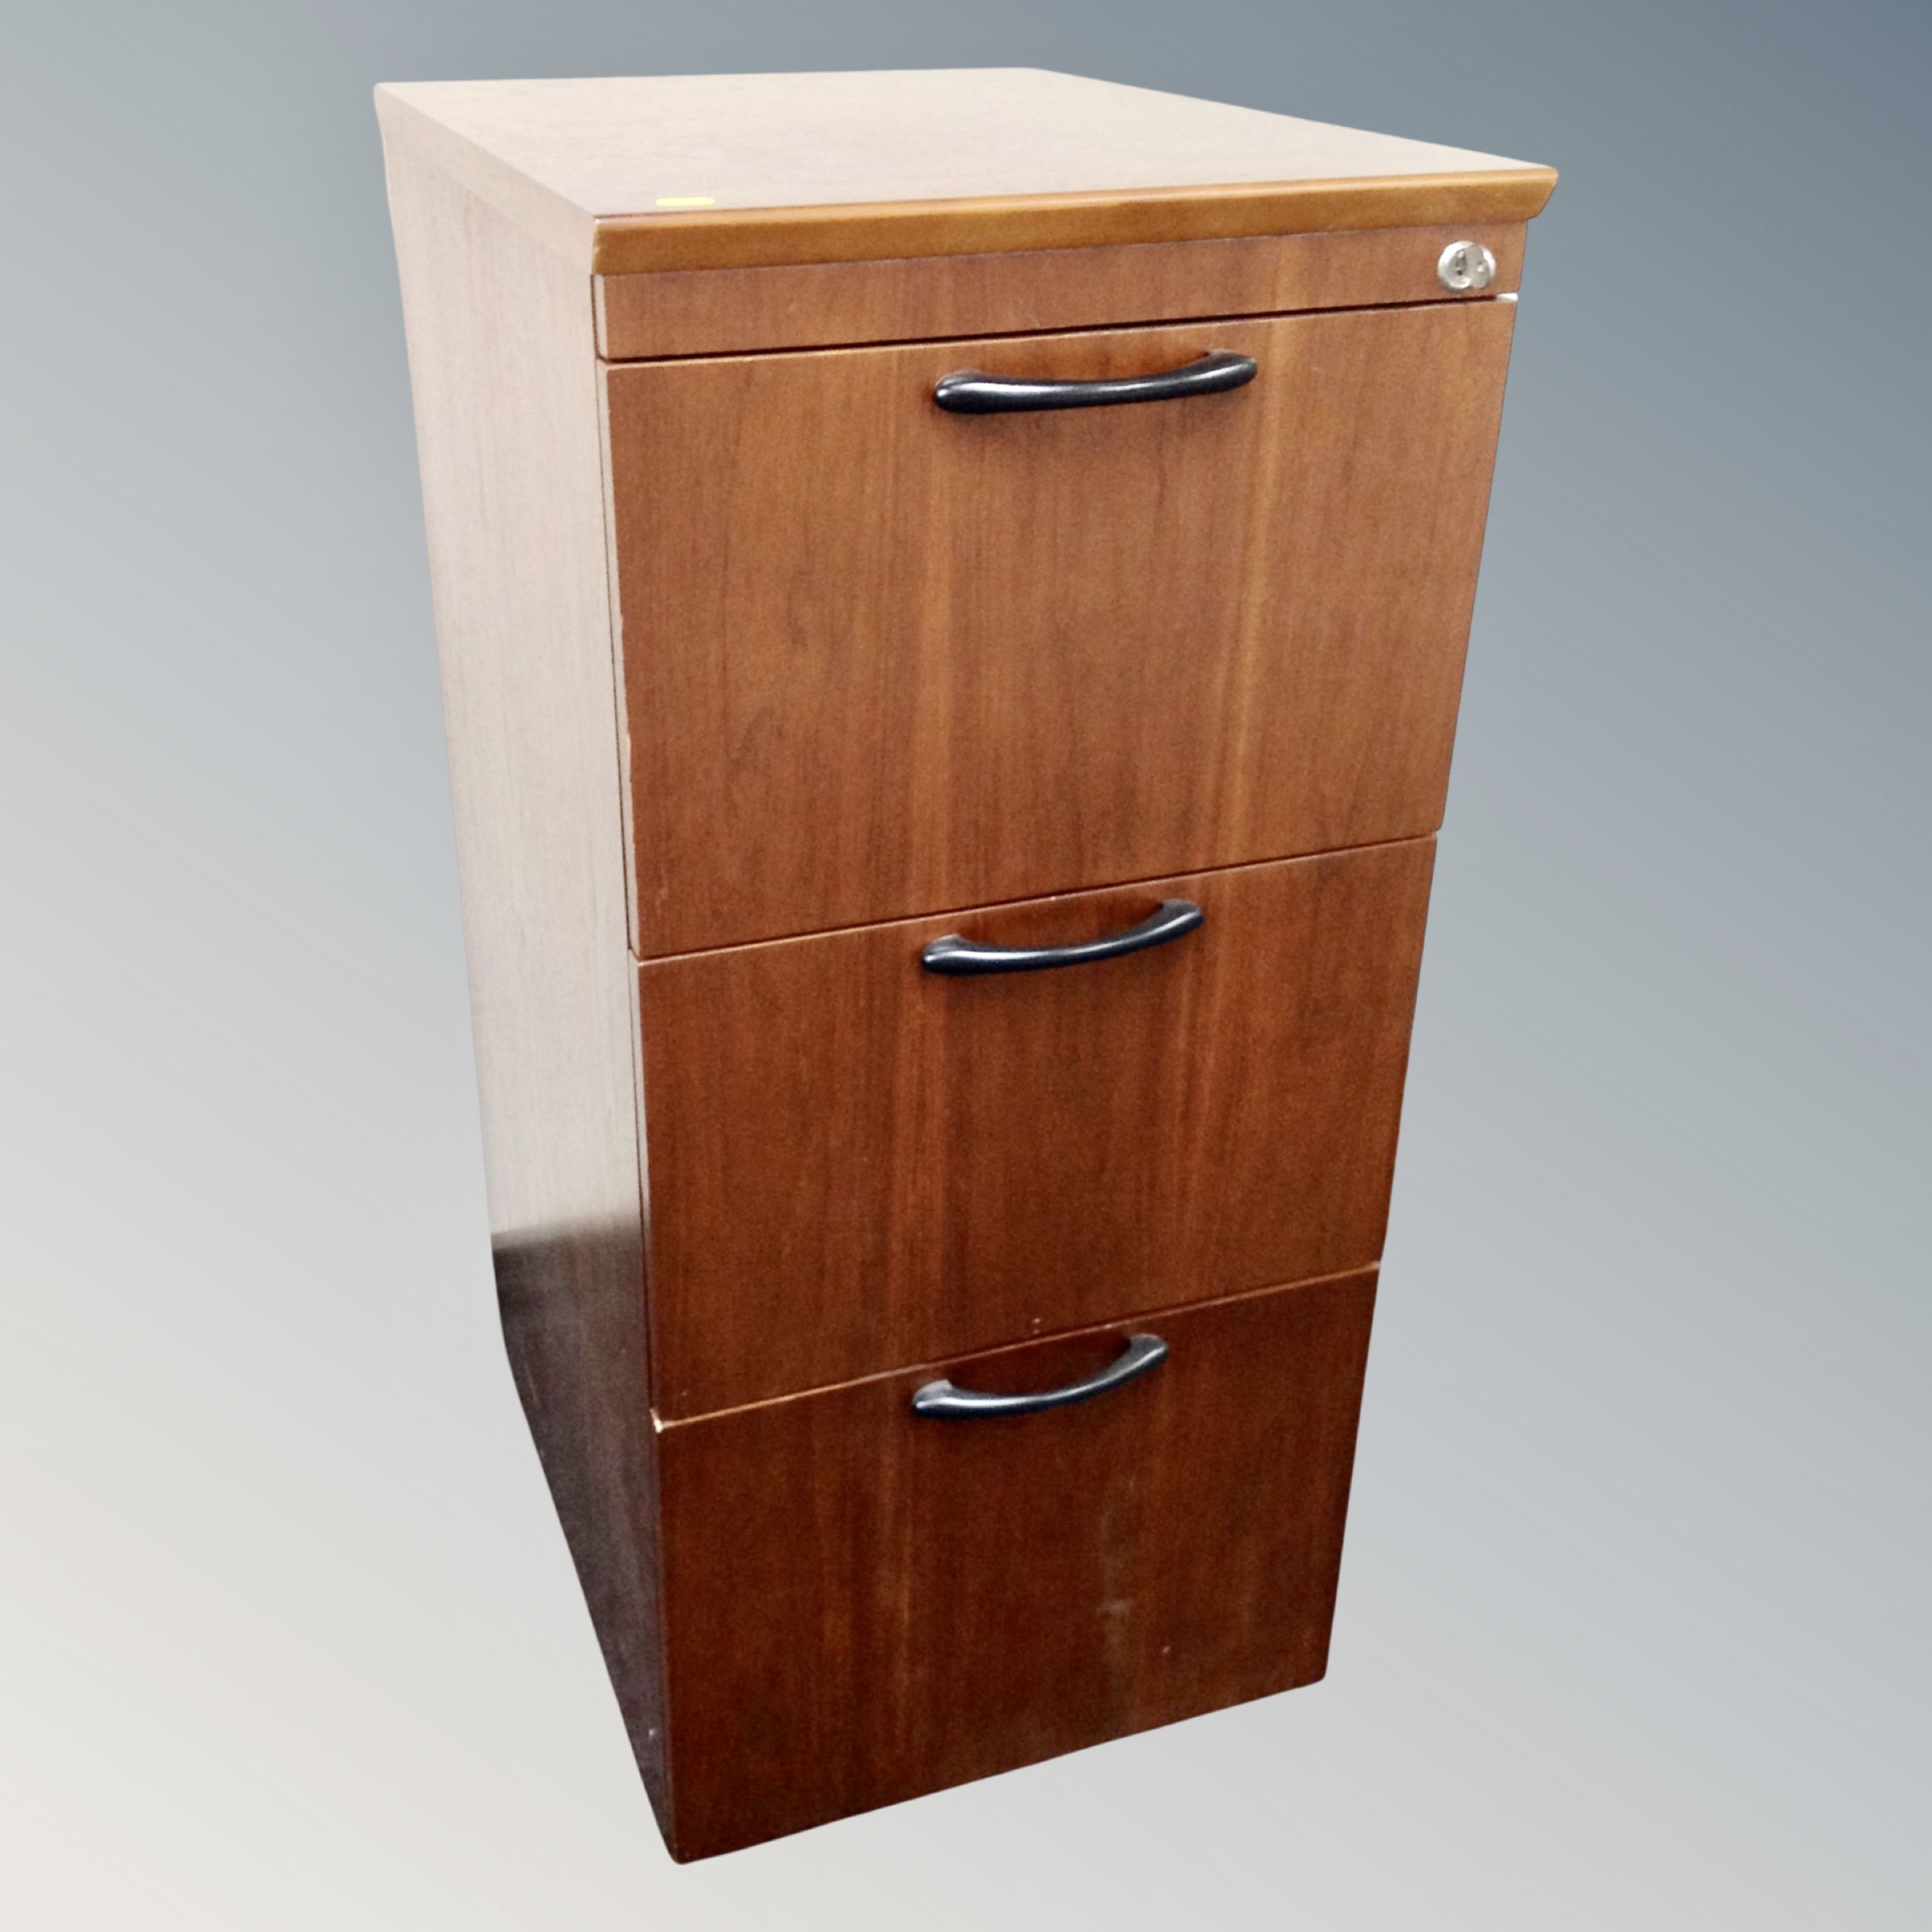 A contemporary filing cabinet with key